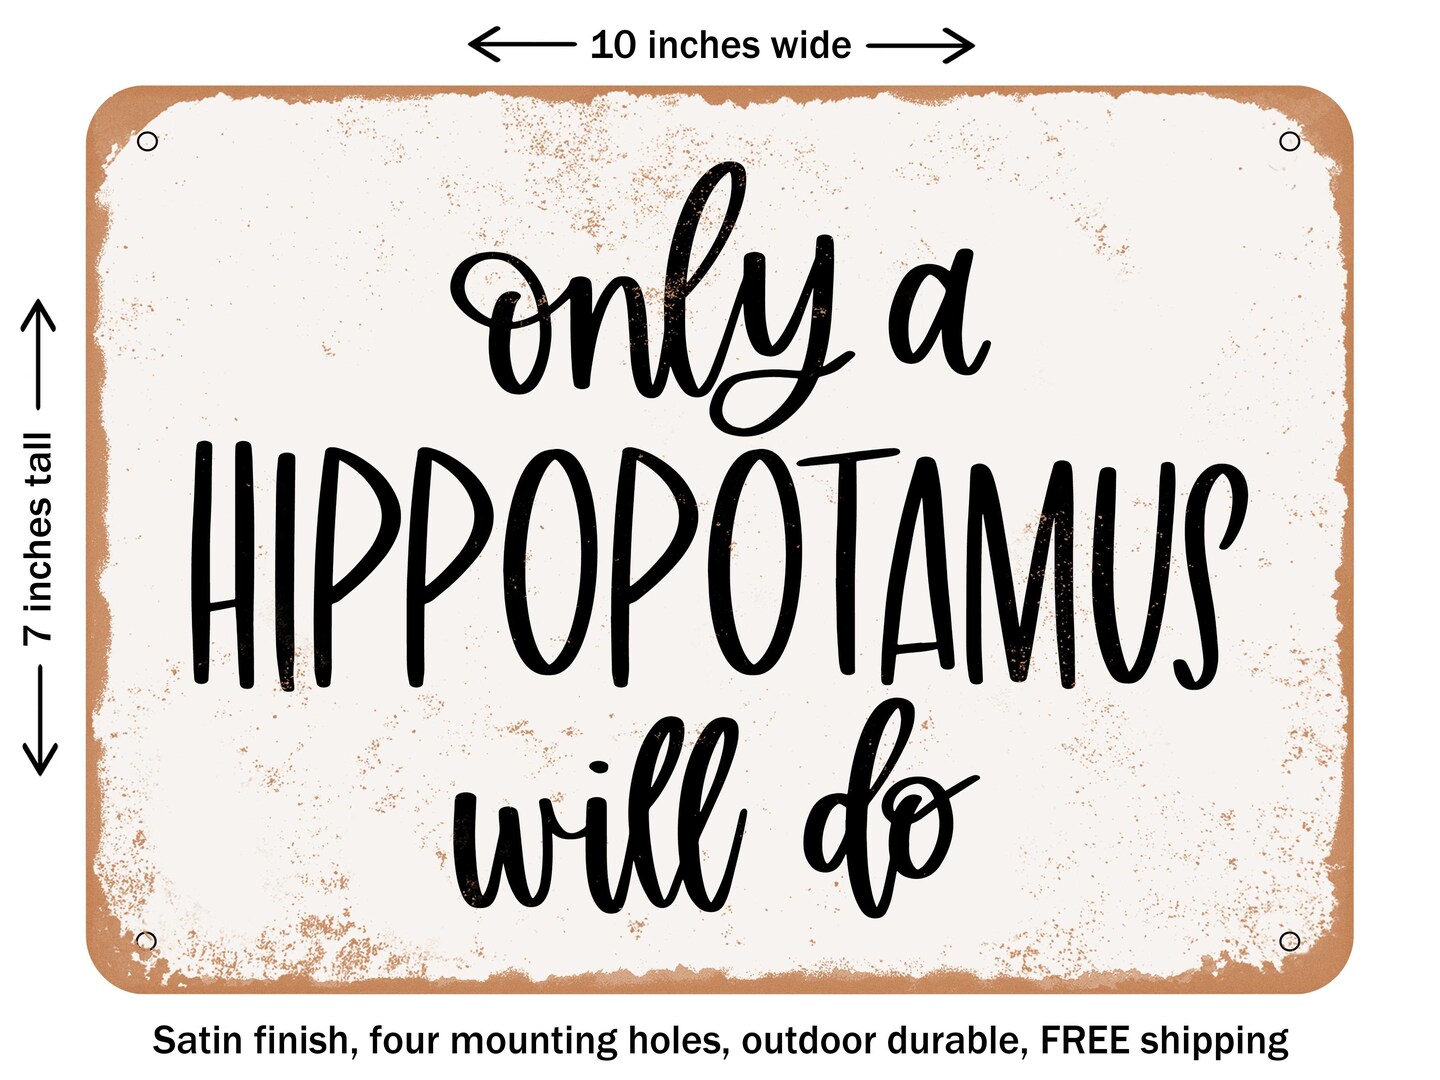 DECORATIVE METAL SIGN - Only a Hippopotamus Will Do - Vintage Rusty Look